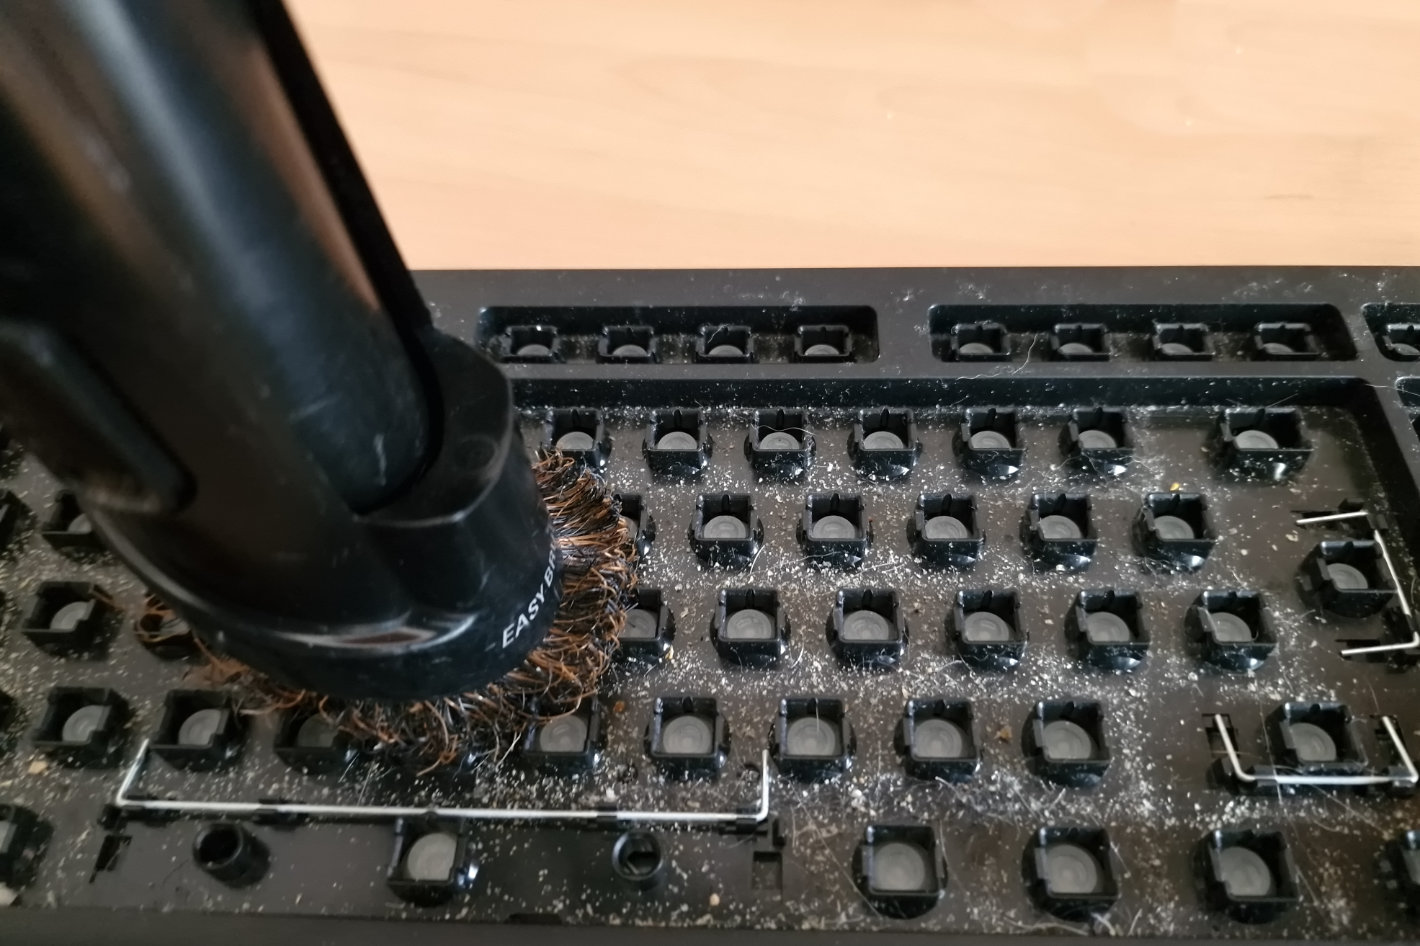 An easy guide to clean your keyboard